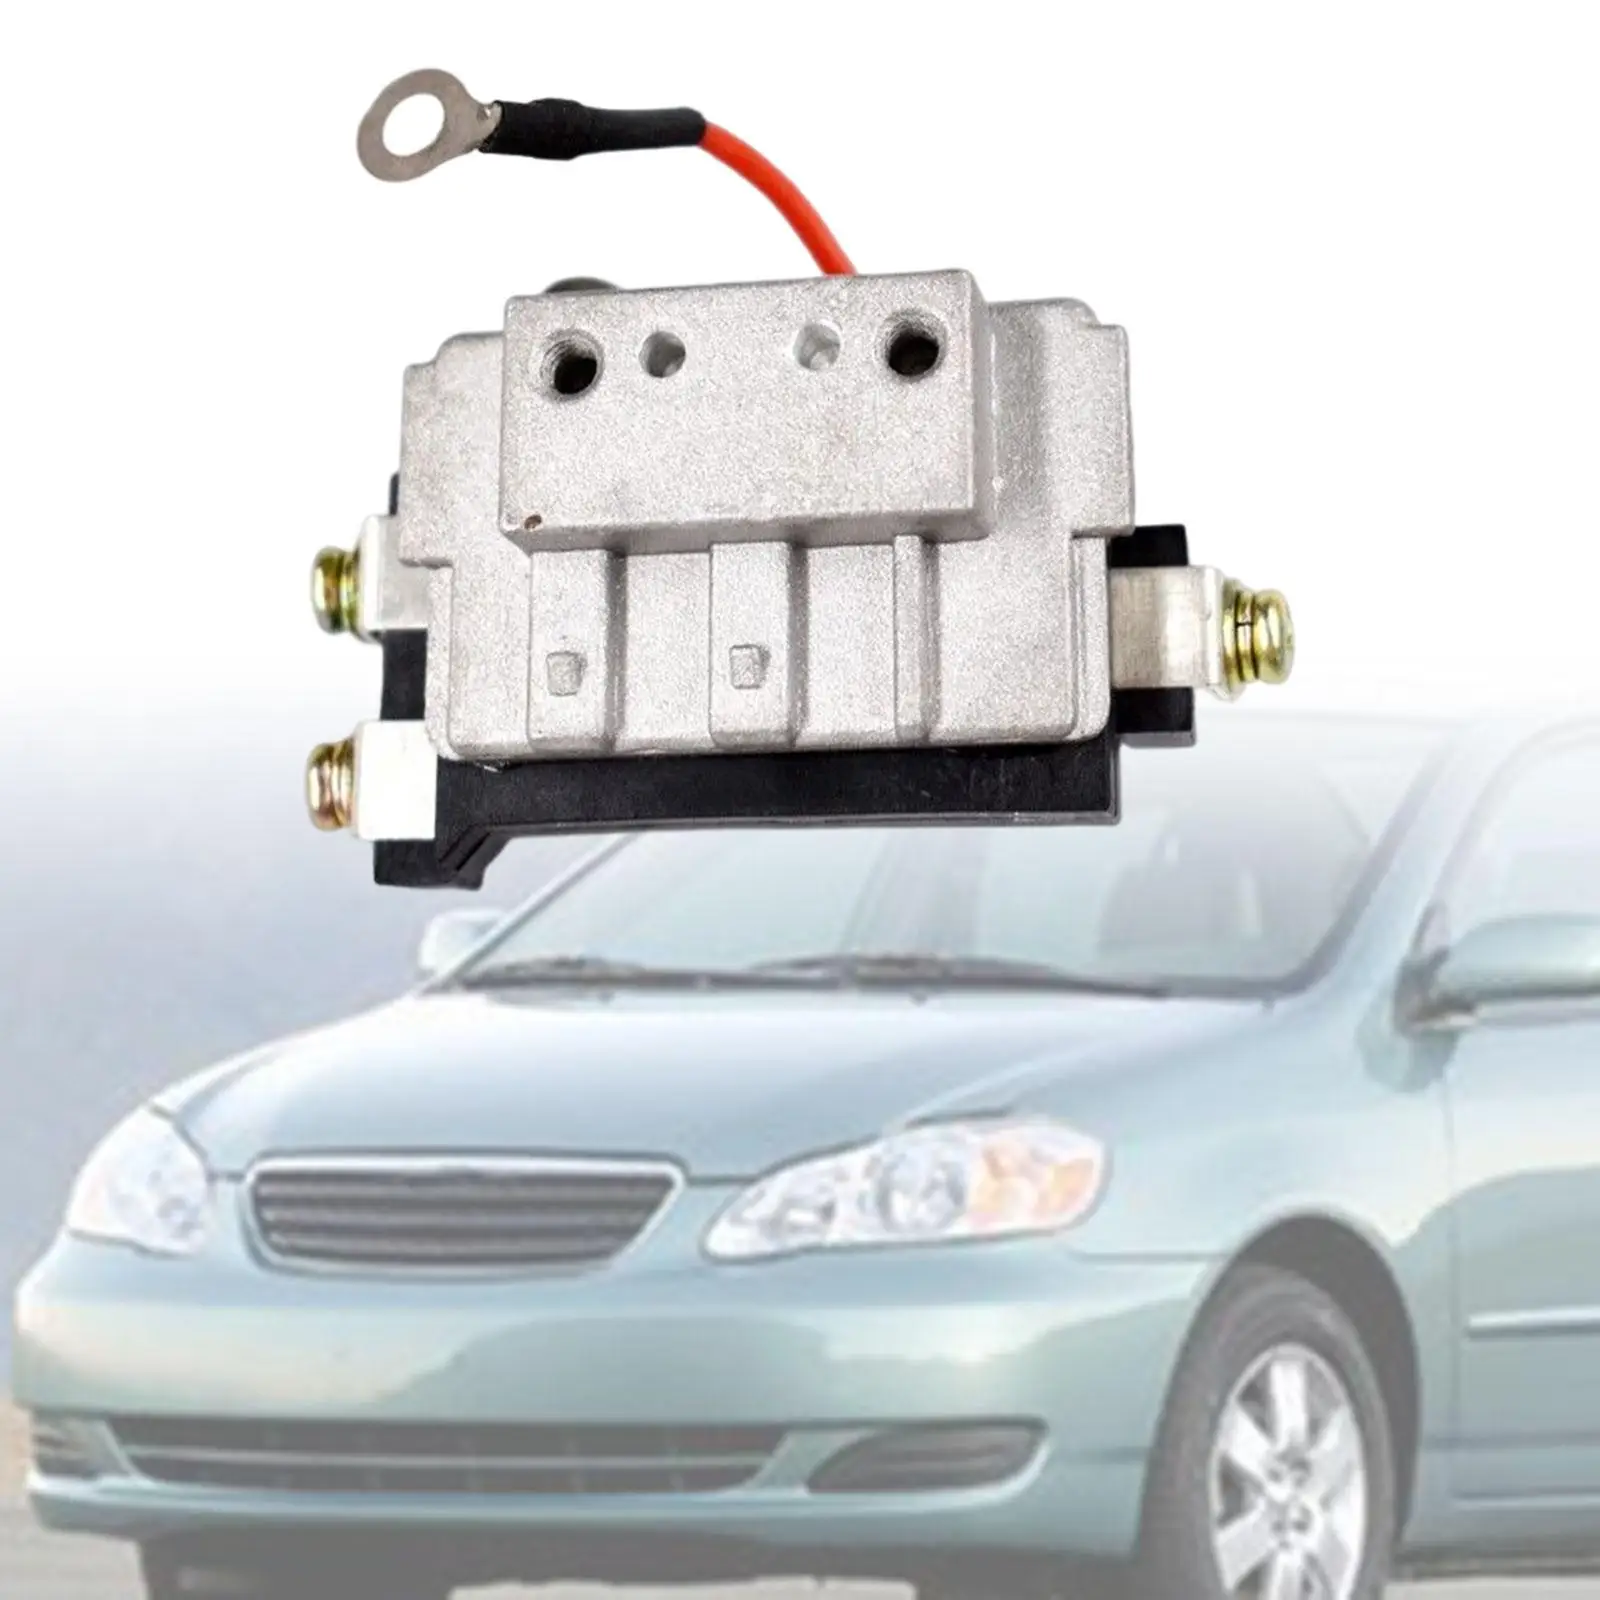 89620-12440 Ignition Control Module Replacement, Accessory, Auto Motor, Spare Parts, Durable ,Easy to Install Professional